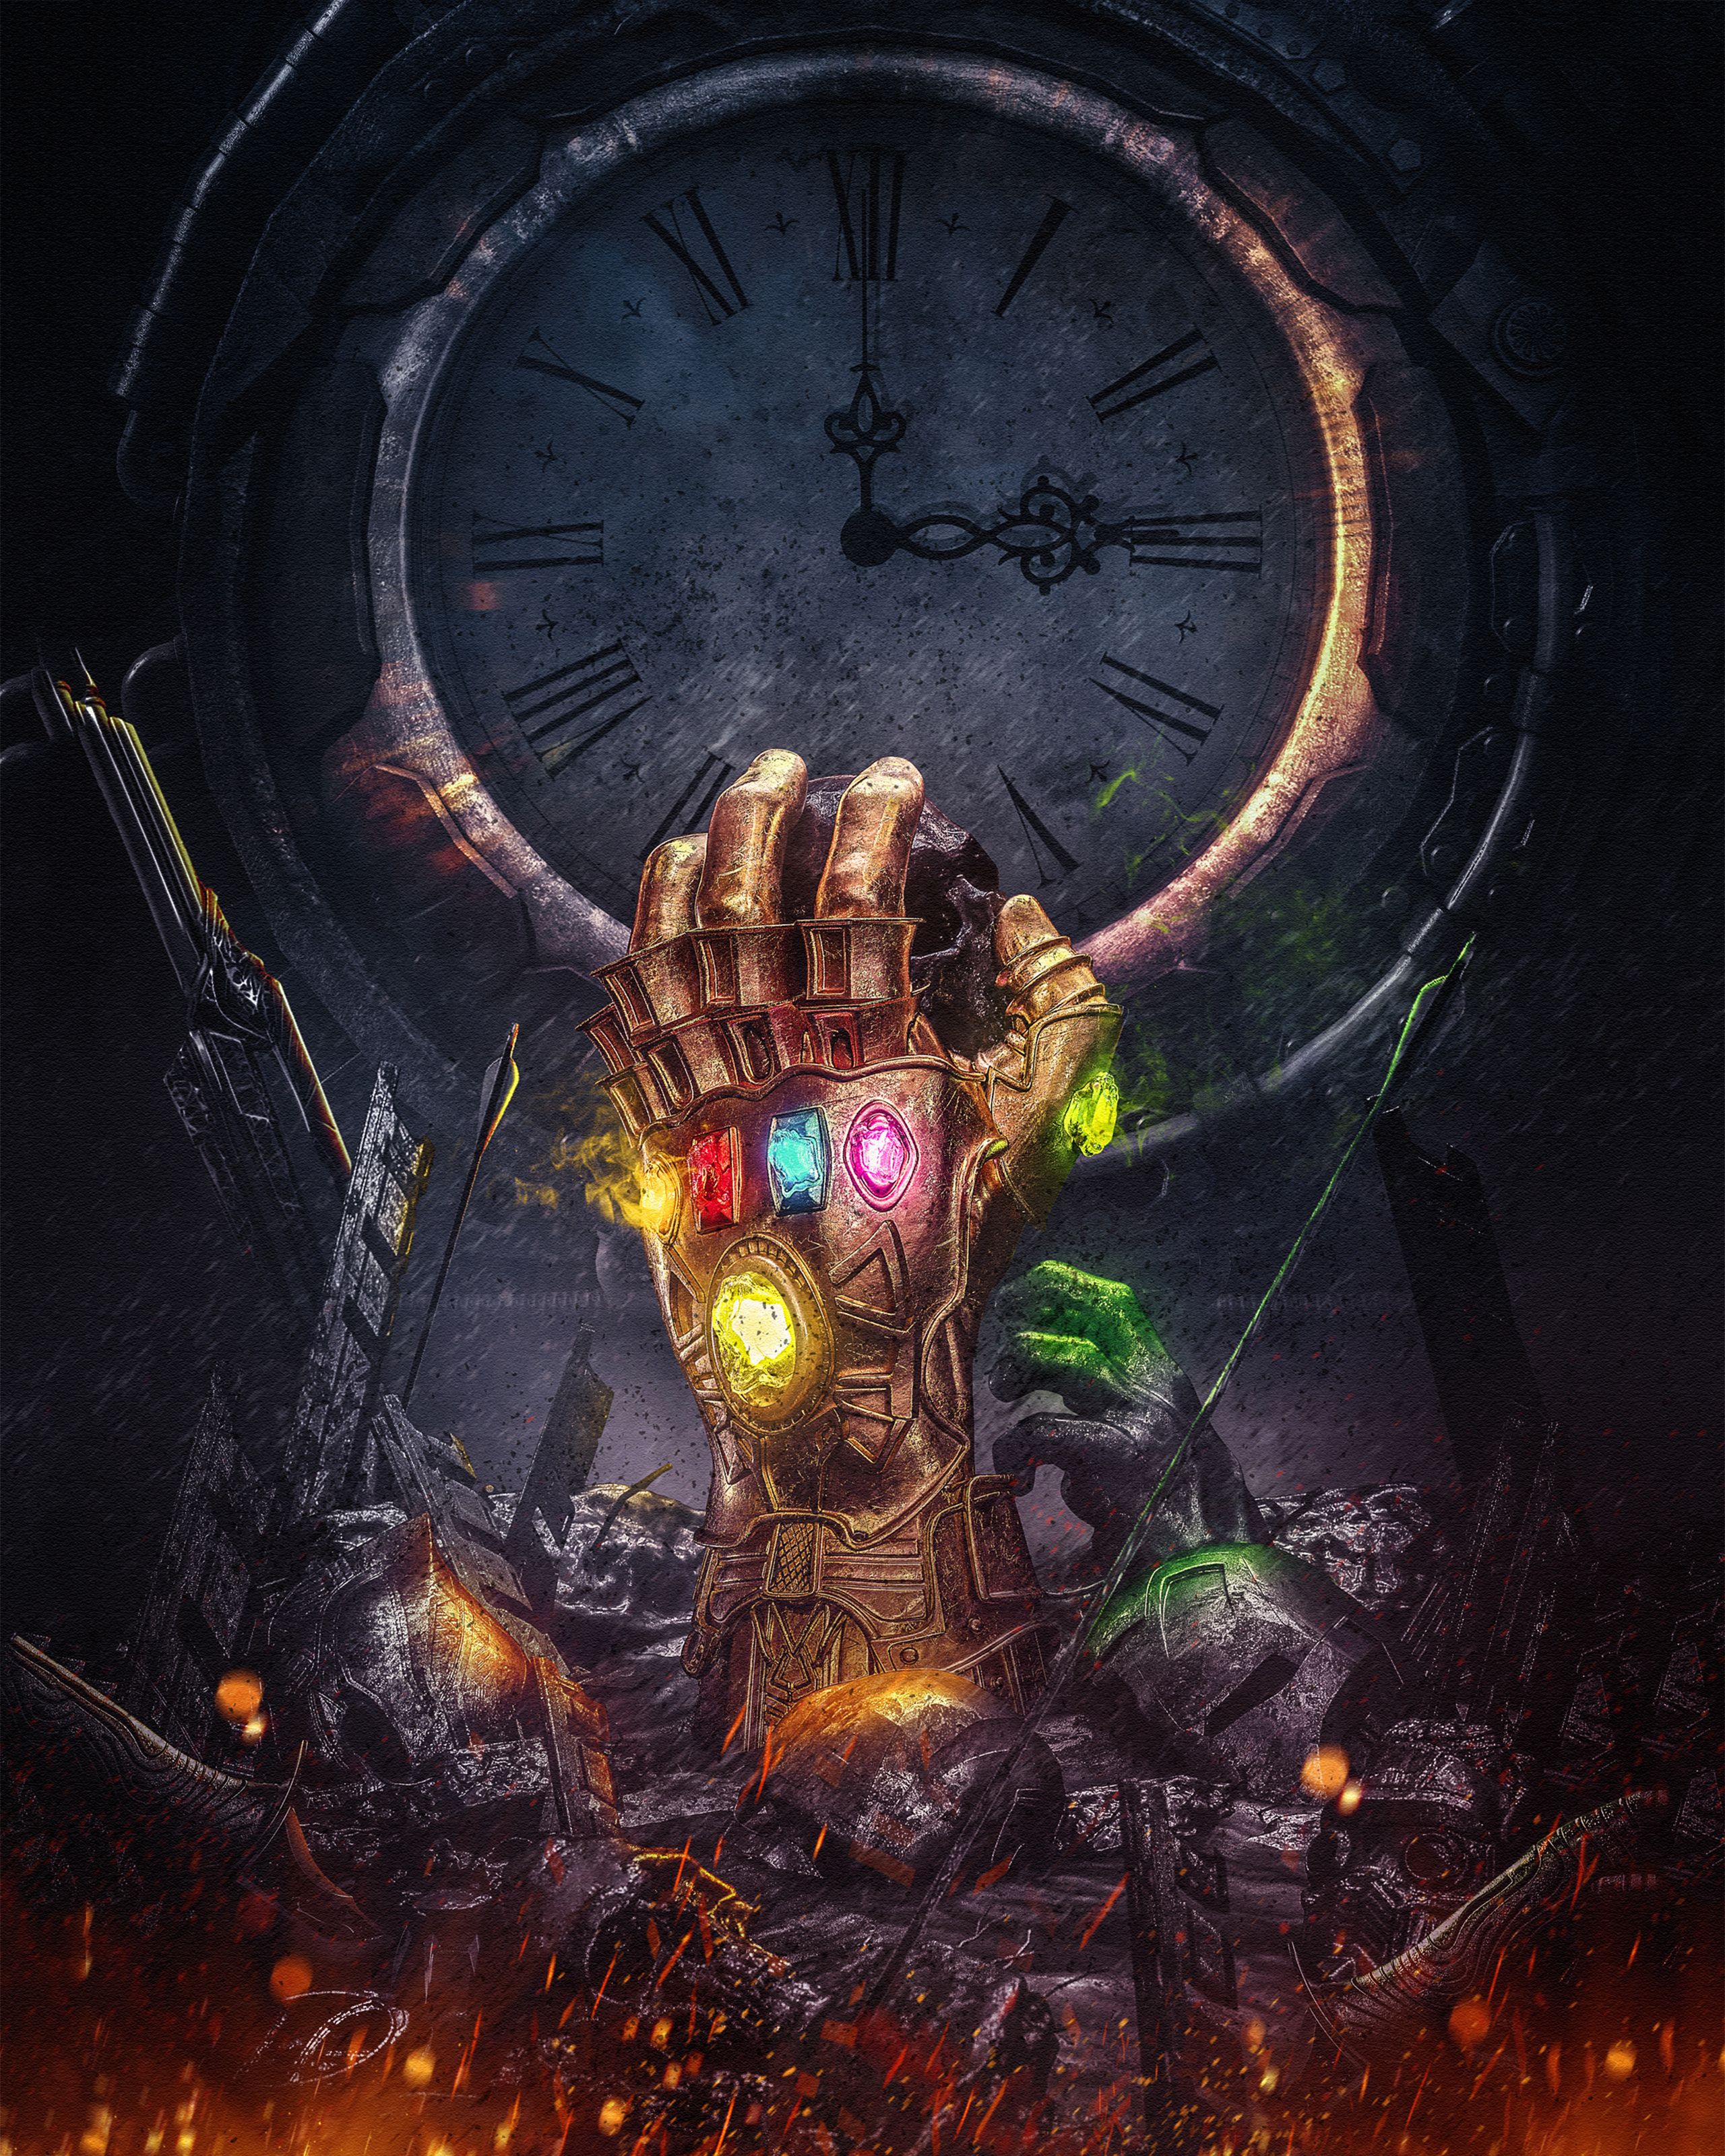 Wallpaper Infinity Gauntlet, Thanos, Infinity Stones, Avengers: Infinity War, Creative Graphics,. Wallpaper for iPhone, Android, Mobile and Desktop